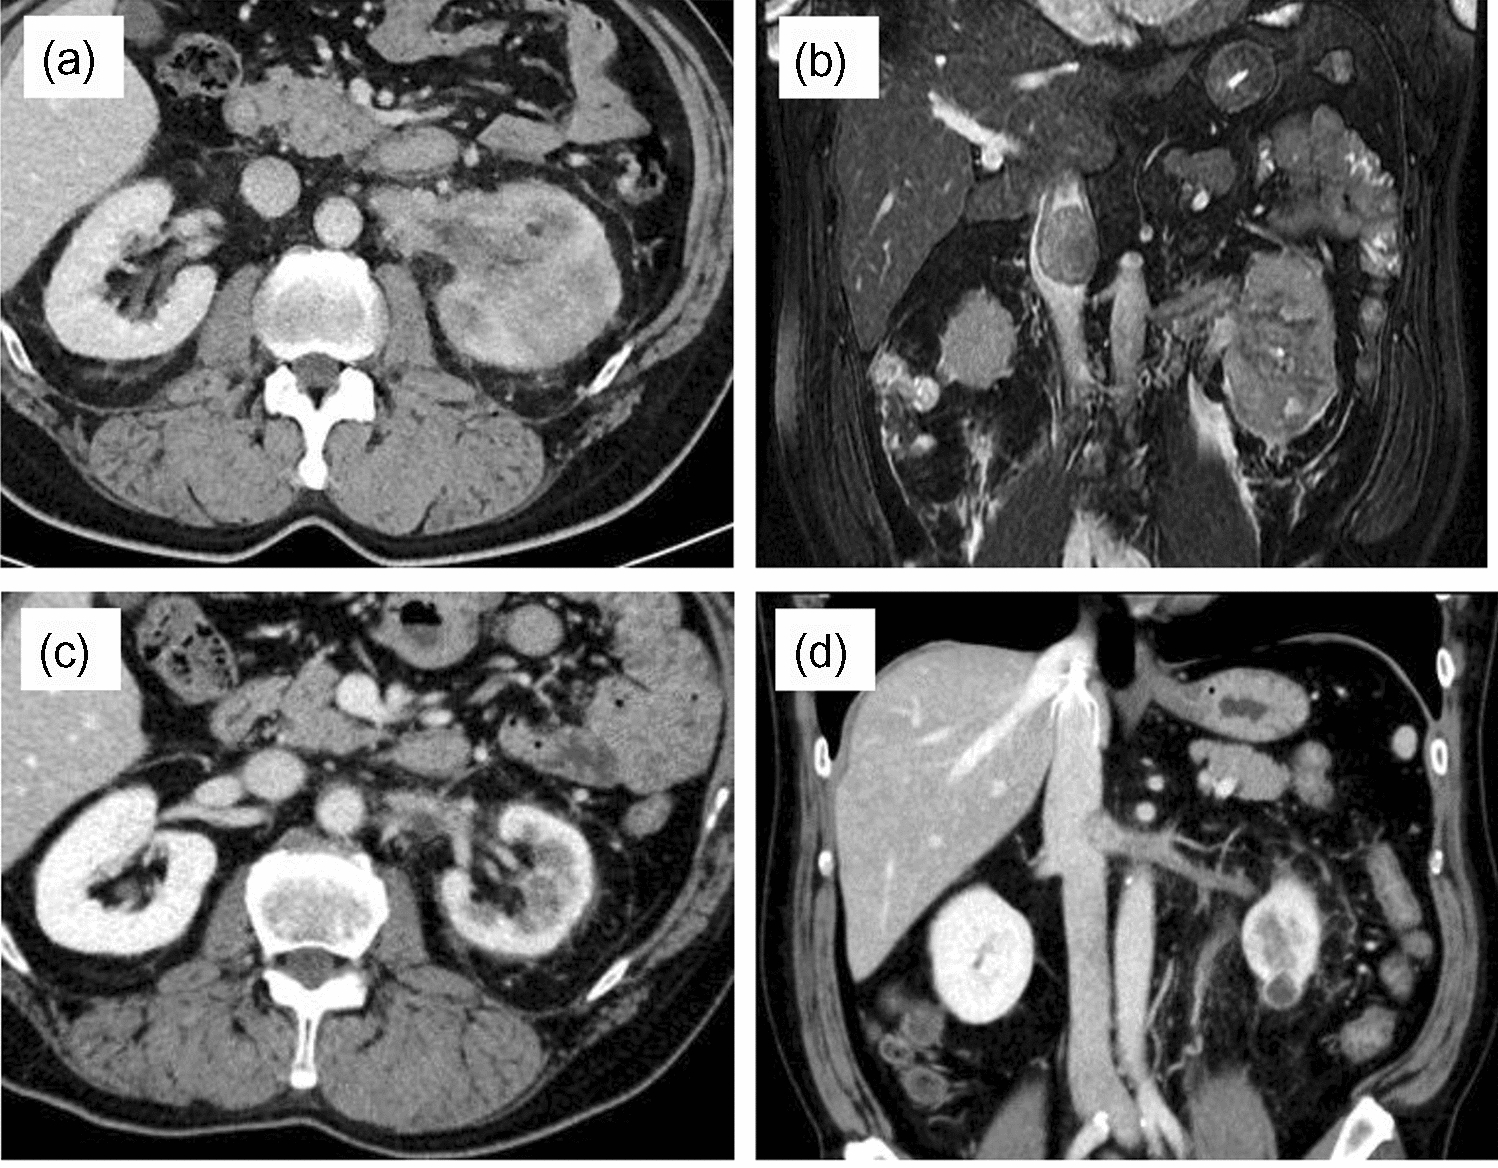 A case of postoperative pancreatitis in patients with renal cell carcinoma with an inferior vena cava tumor thrombus treated by presurgical lenvatinib plus pembrolizumab